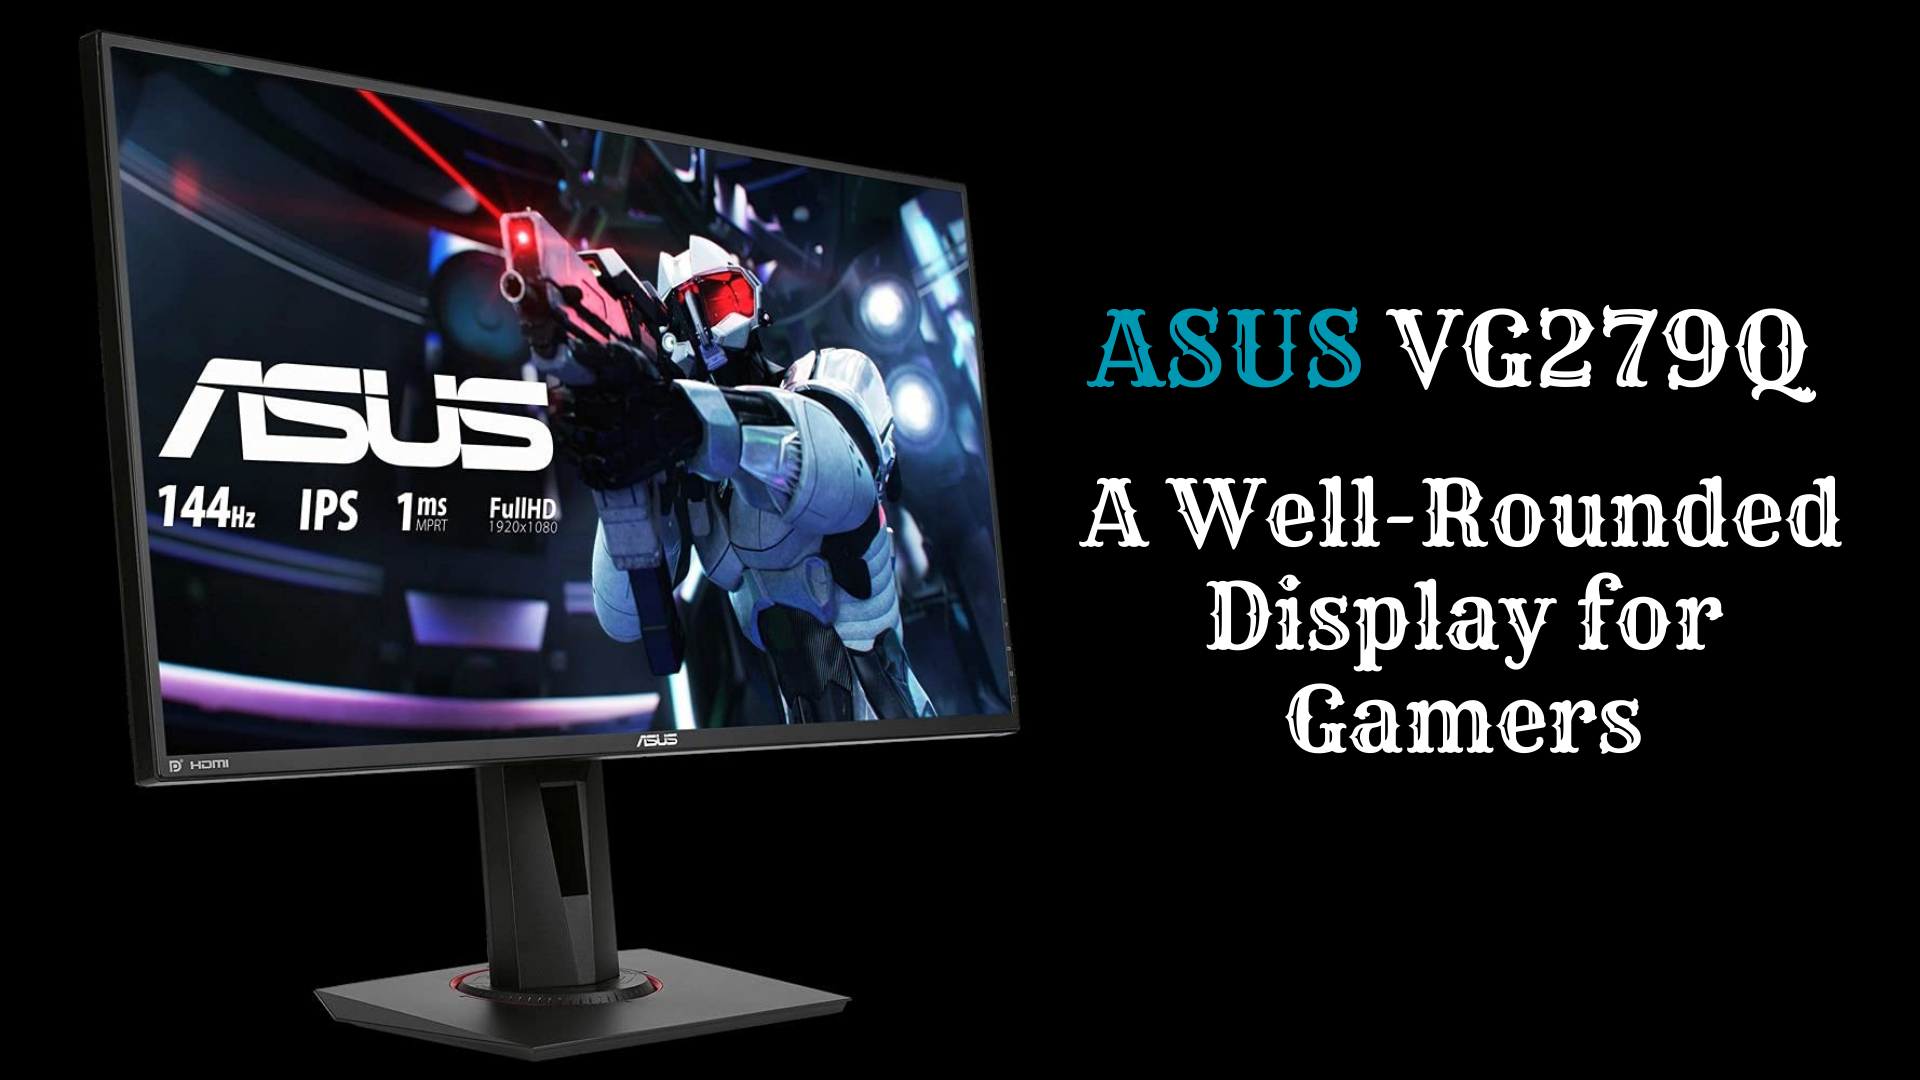 ASUS VG279Q: A Well-Rounded Display for Gamers